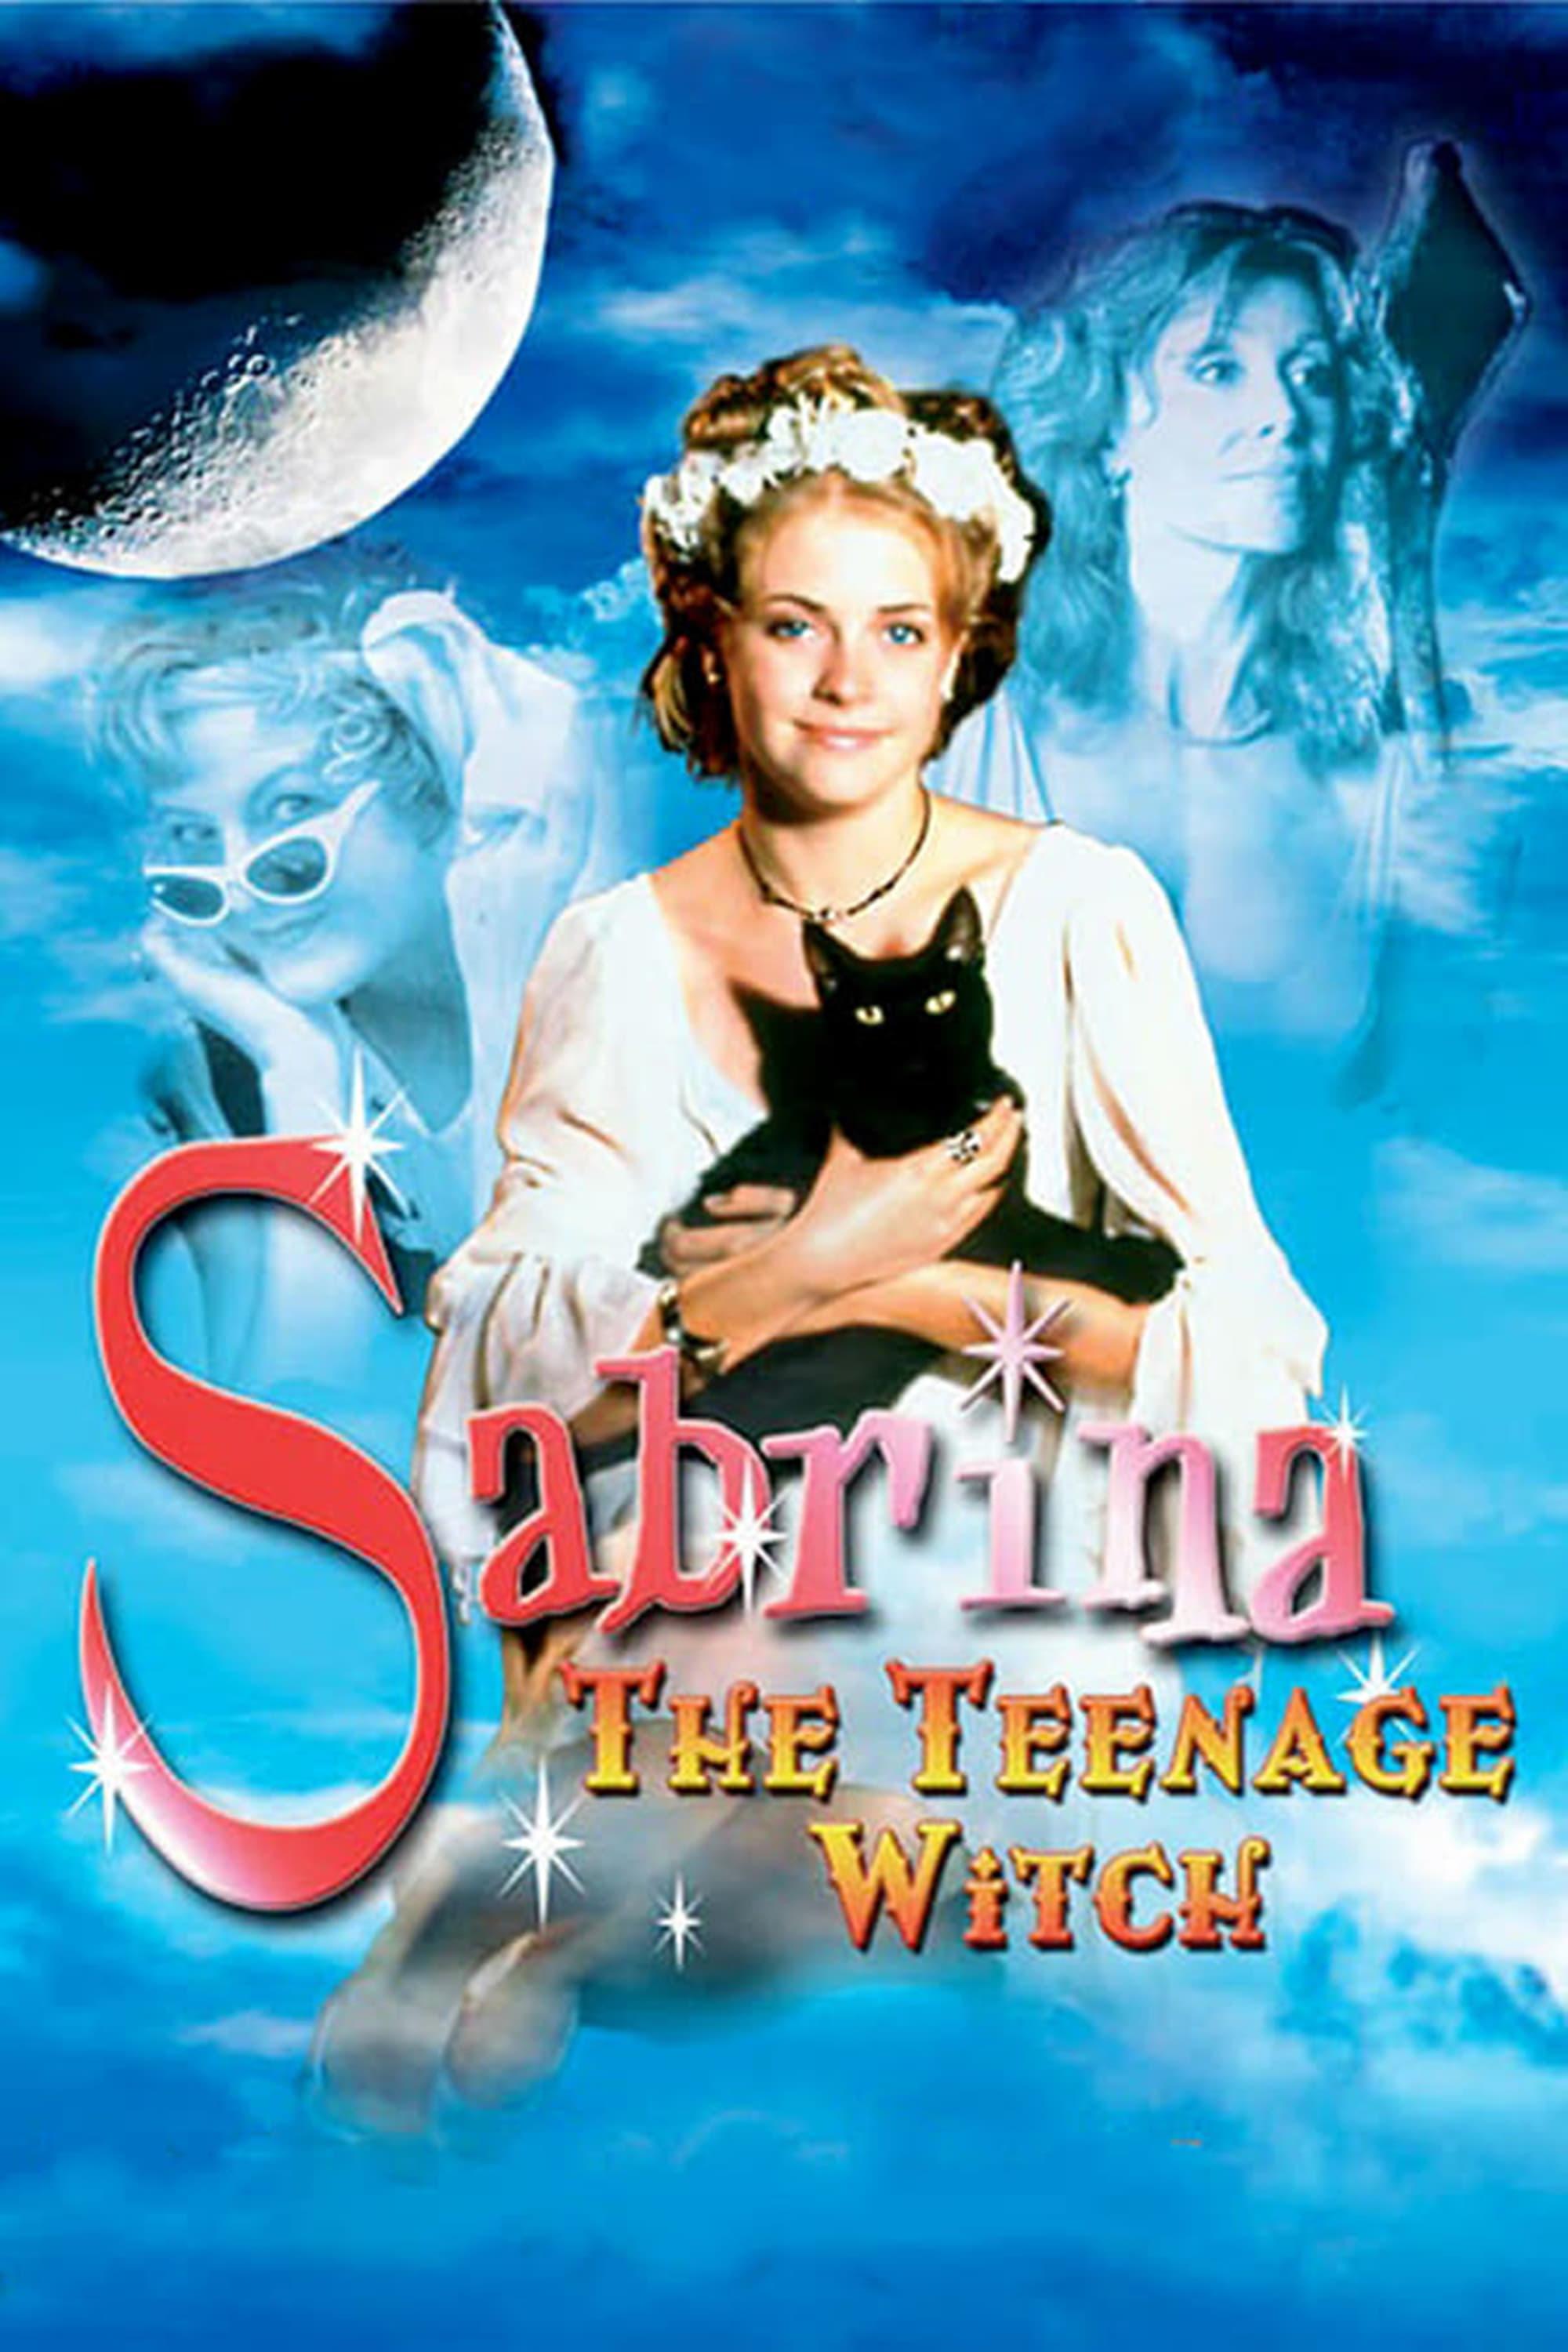 Sabrina the Teenage Witch poster